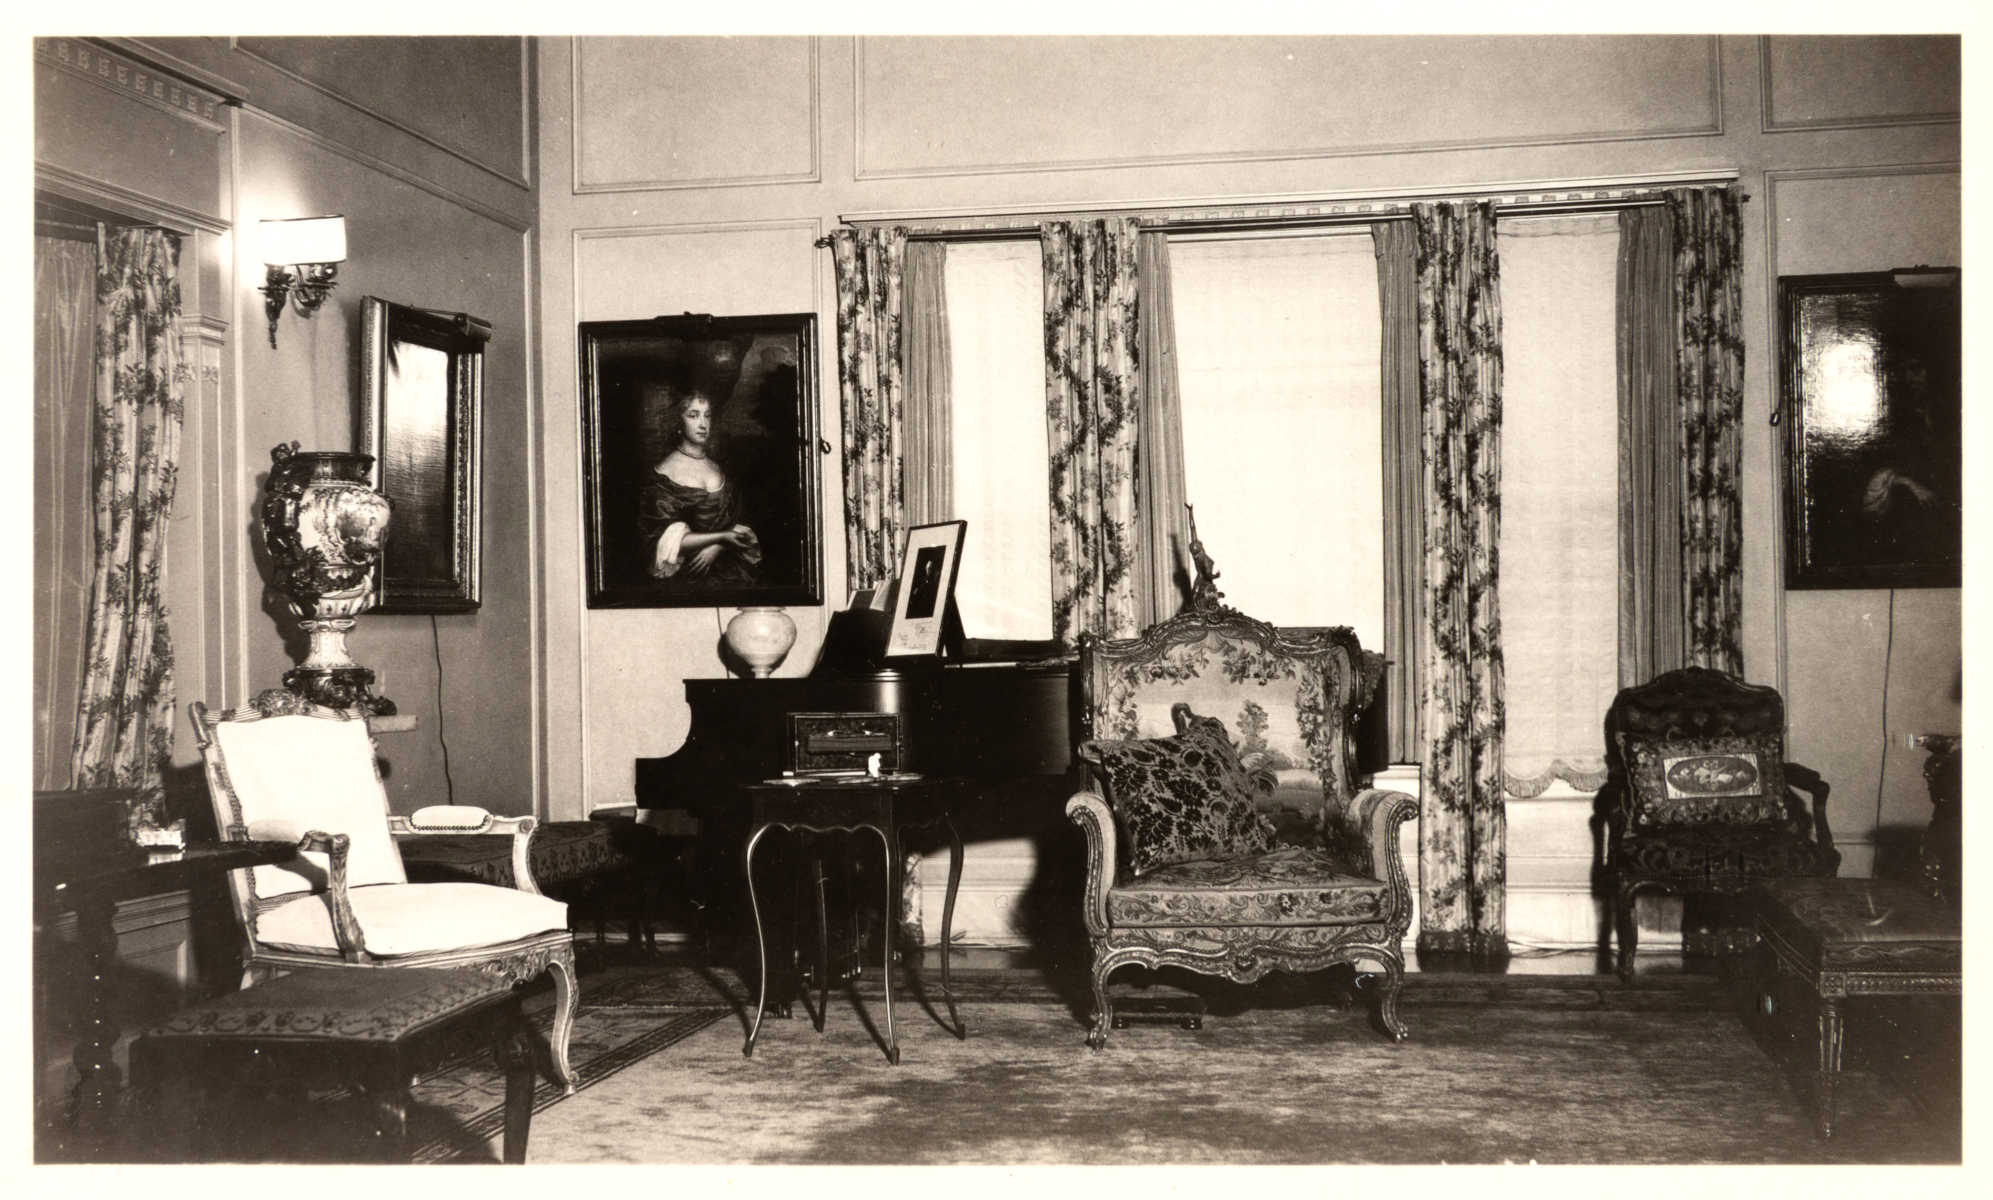 Room interior c. 1915-20 of The Oaks, Sunninghill reference D/EX2780/1/36